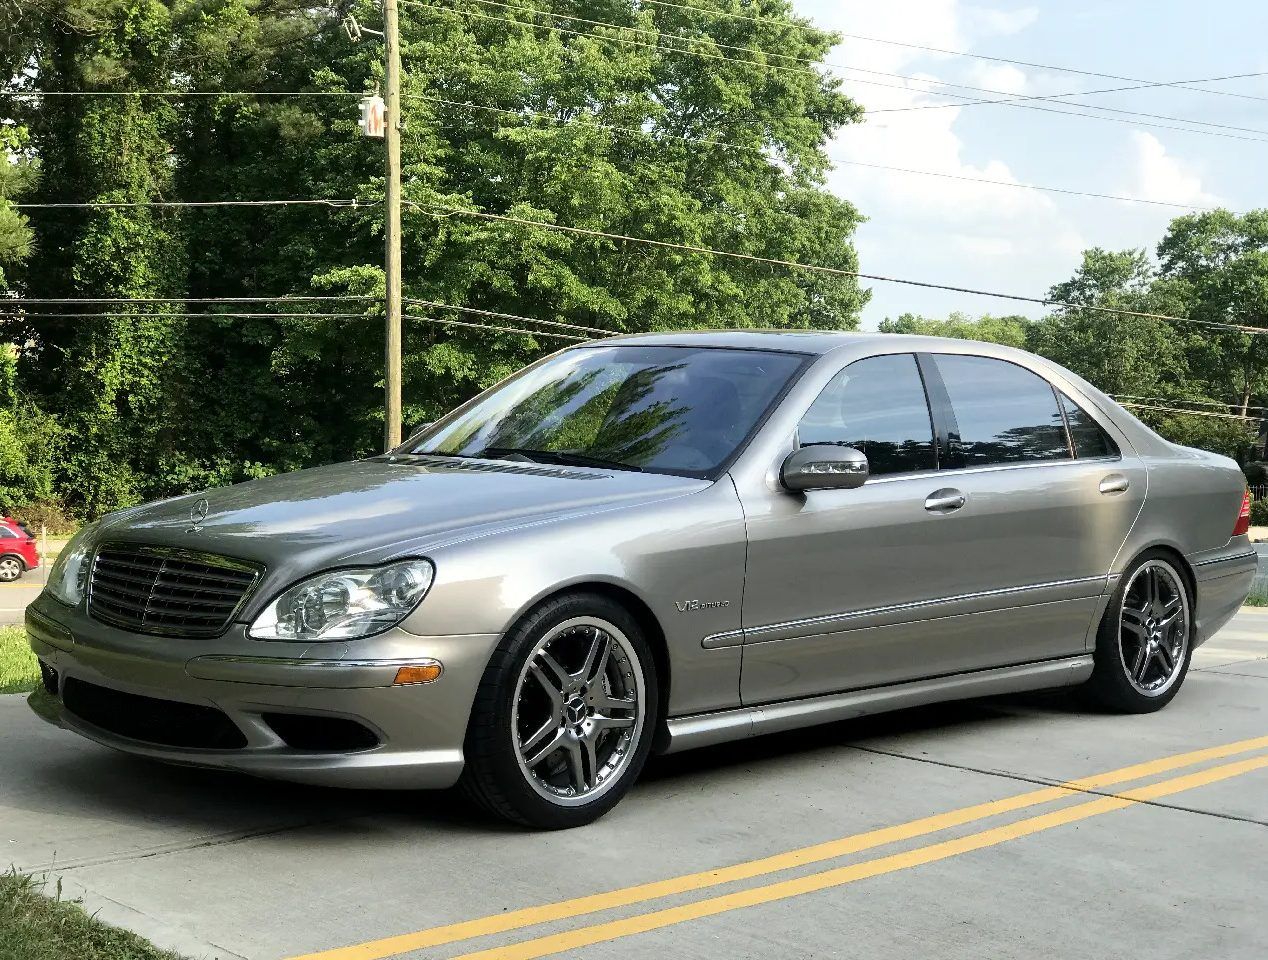 2006 Mercedes-Benz S65 AMG offers top of the line everything